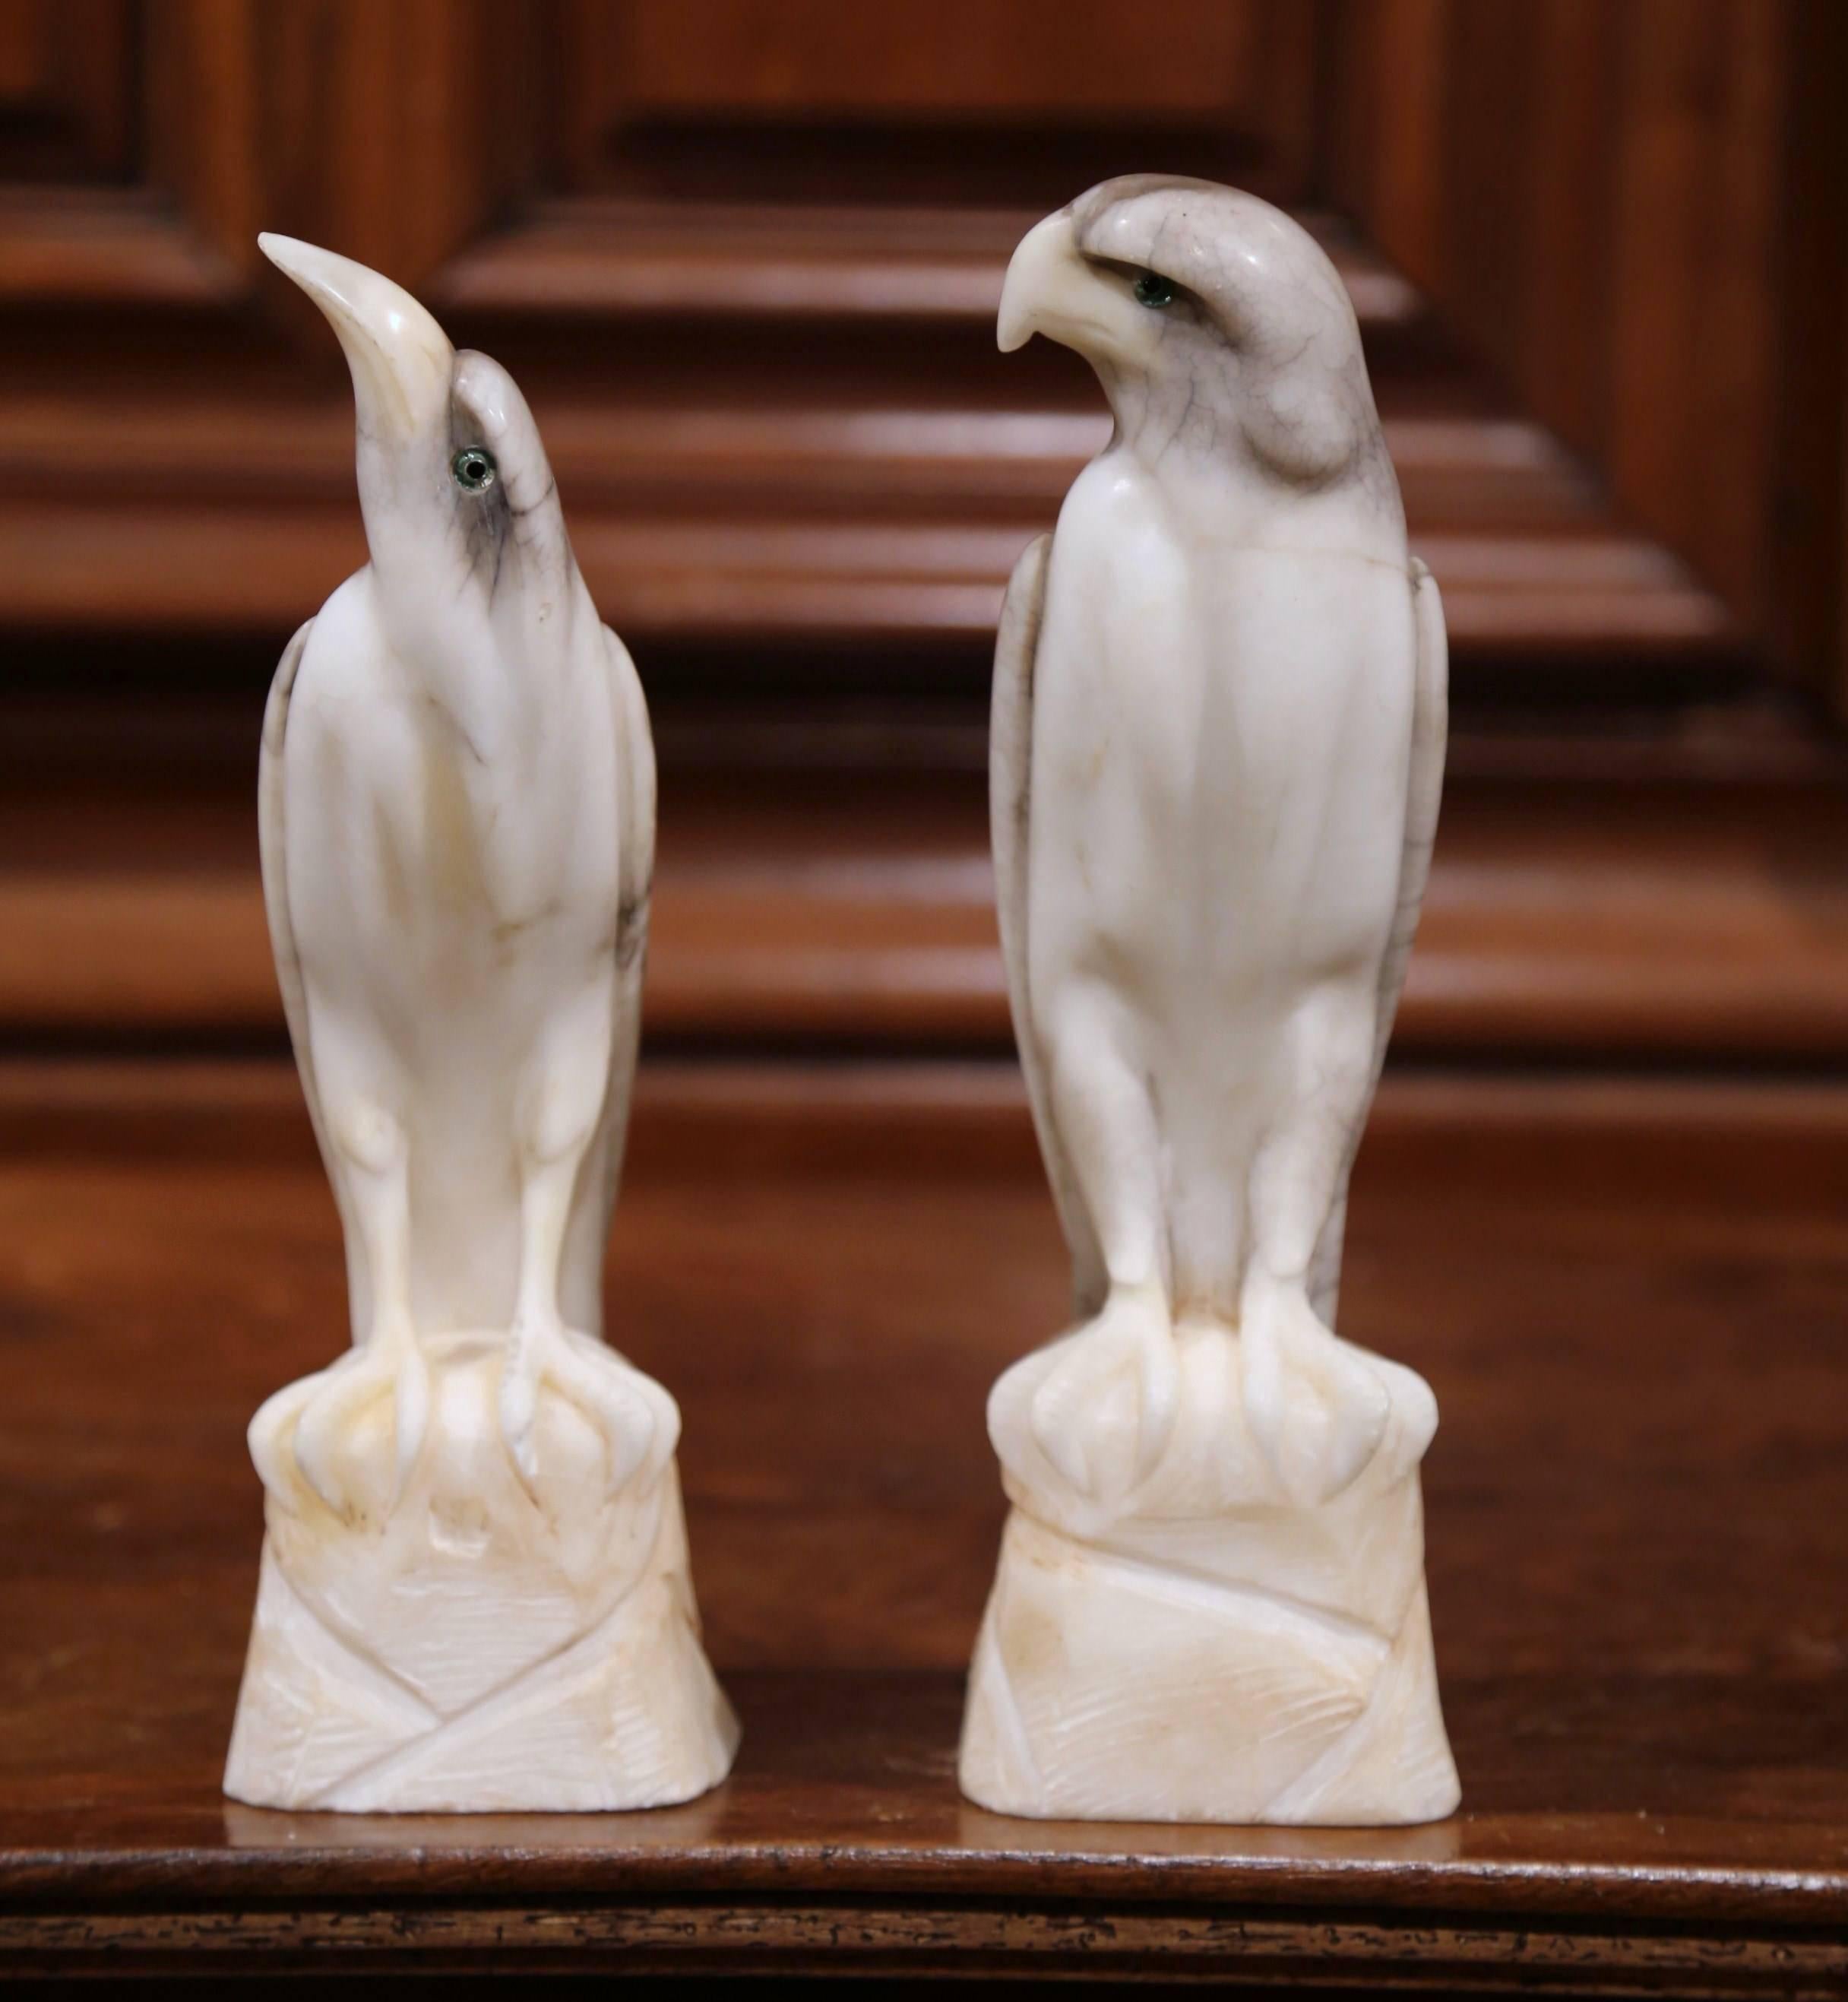 This fine pair of antique birds were carved in France, circa 1880. Each bird - one an eagle, the other a falcon - stands on a rocky base. Both avian figures are carved from gray and white marble, and have glass eyes and beautiful, detailed plumage.